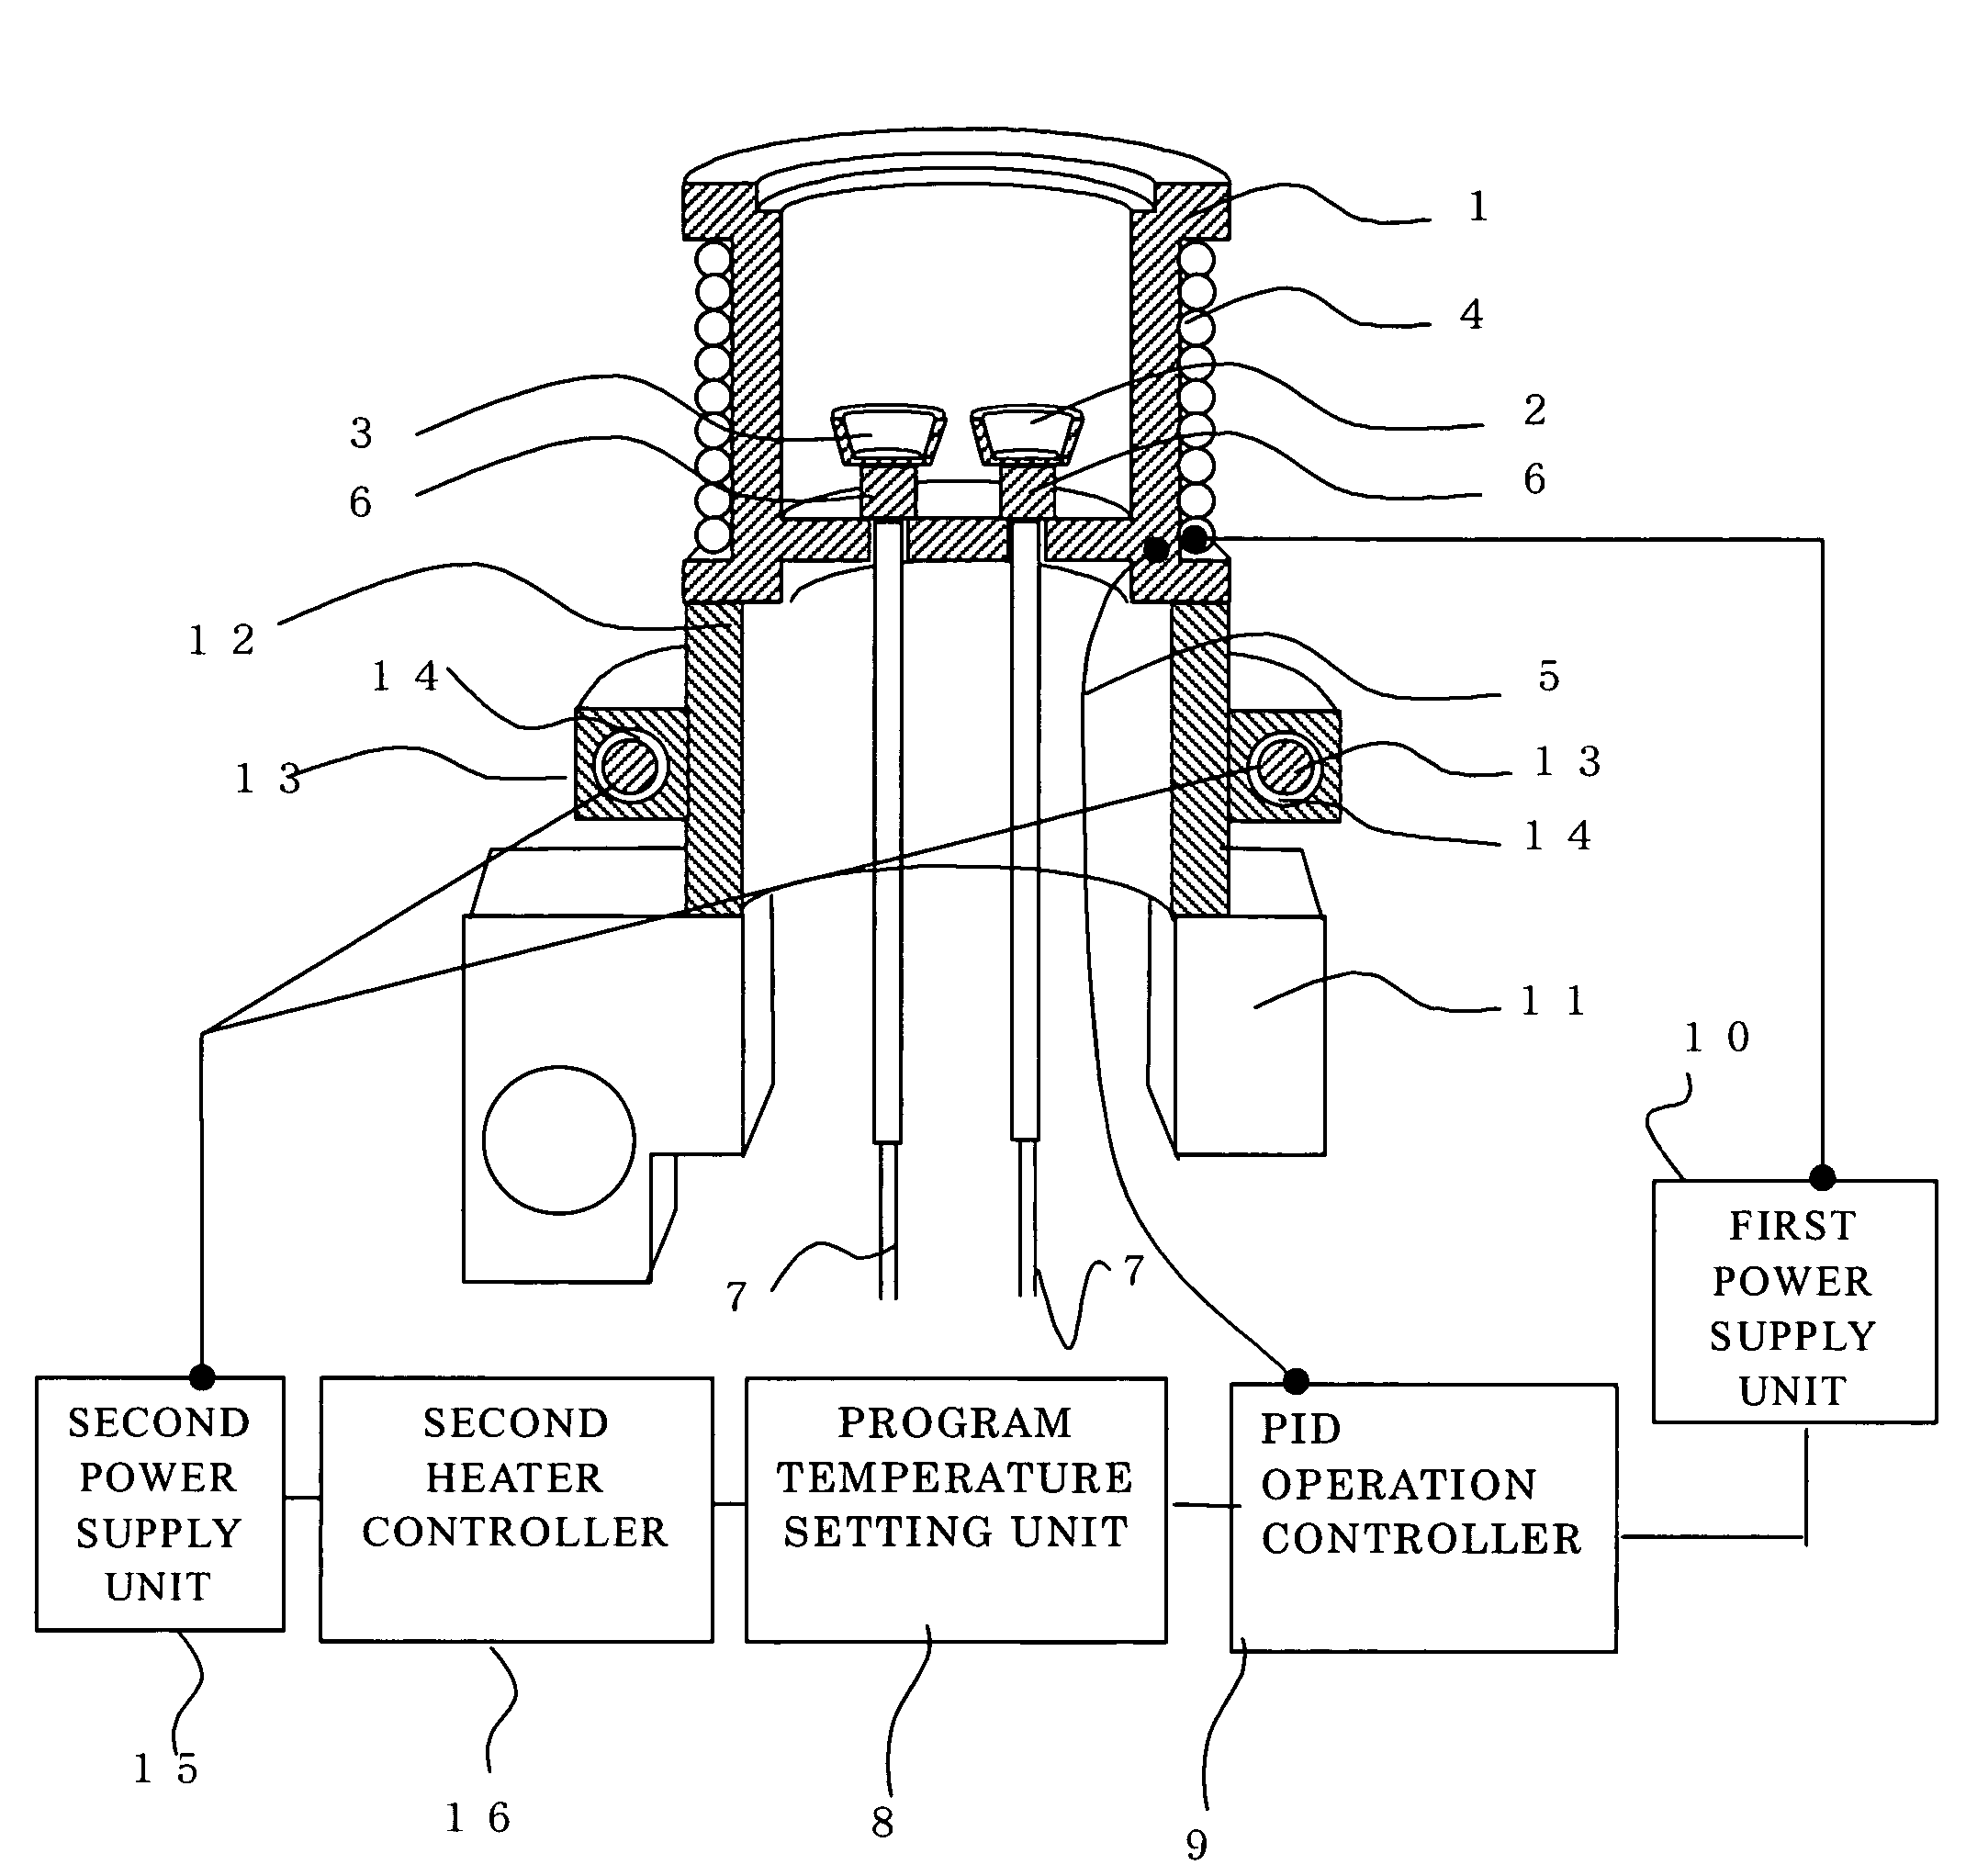 Differential scanning calorimeter with a second heater